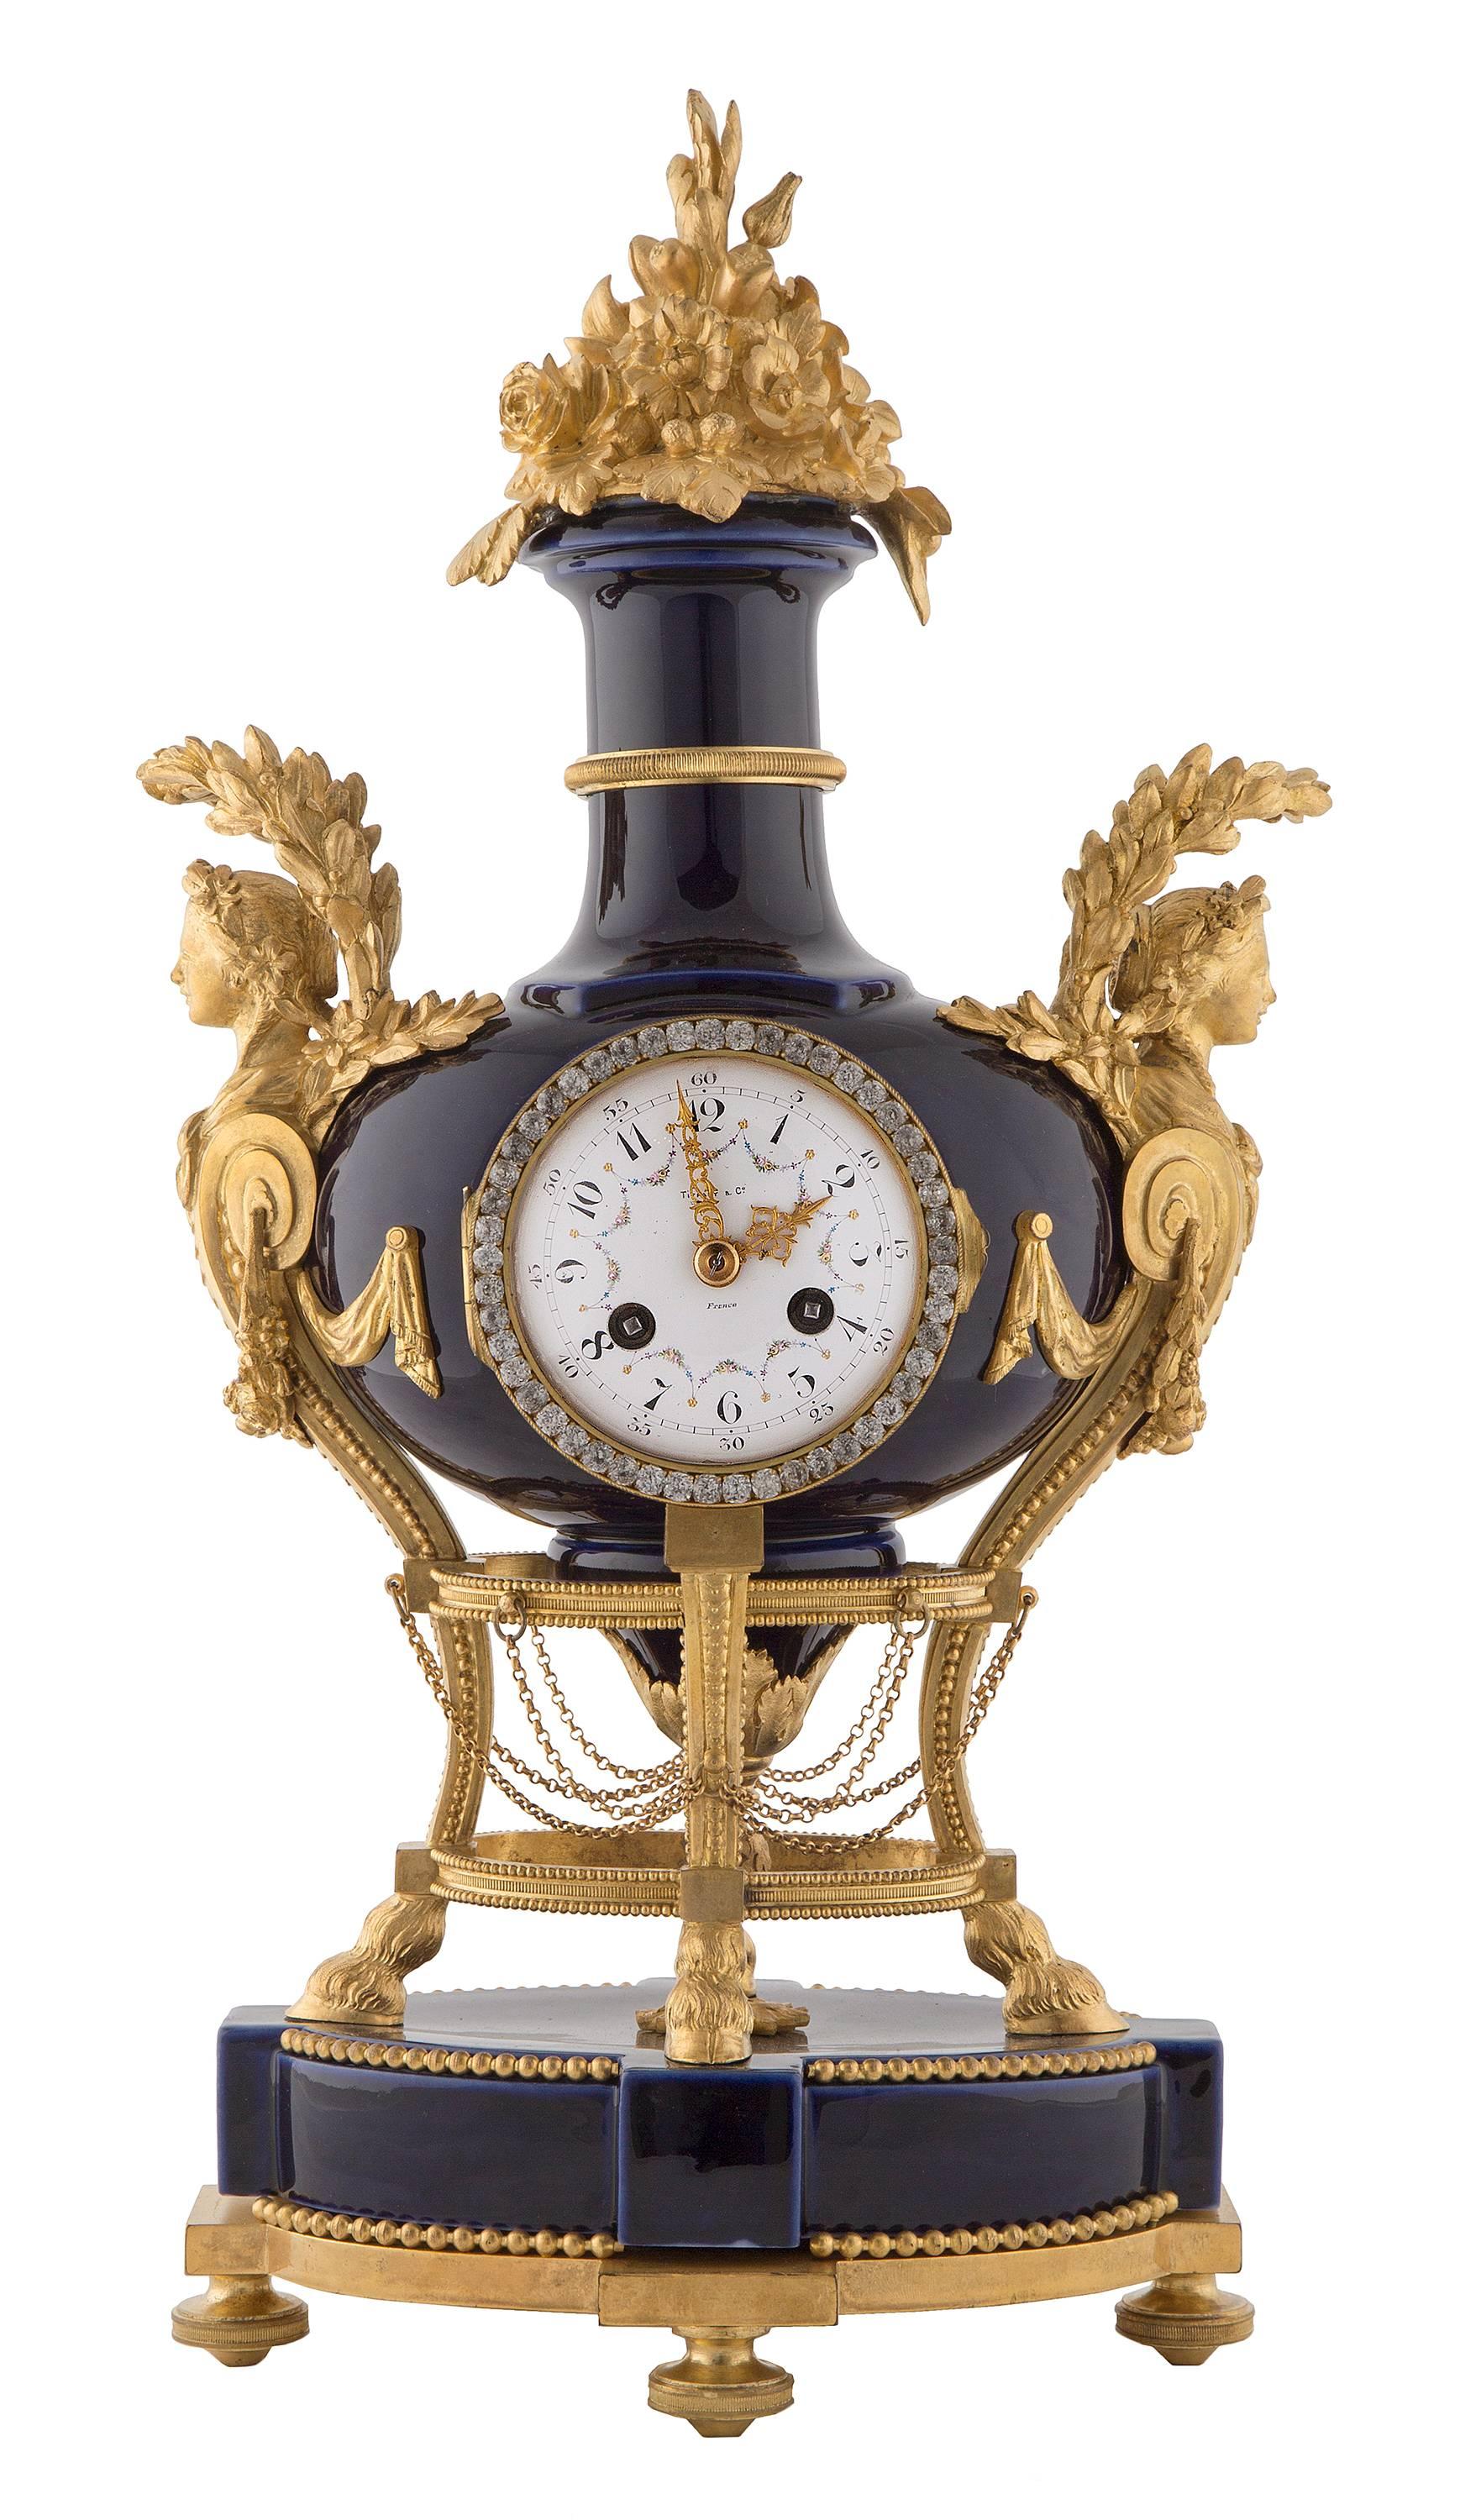 A stunning French 19th century Louis XVI St. ormolu and cobalt blue Sèvres clock by Tiffany & Co. The clock is raised on ormolu topie feet and support with beaded border. The oval Sèvres base is accented by a central ormolu rosette and beaded